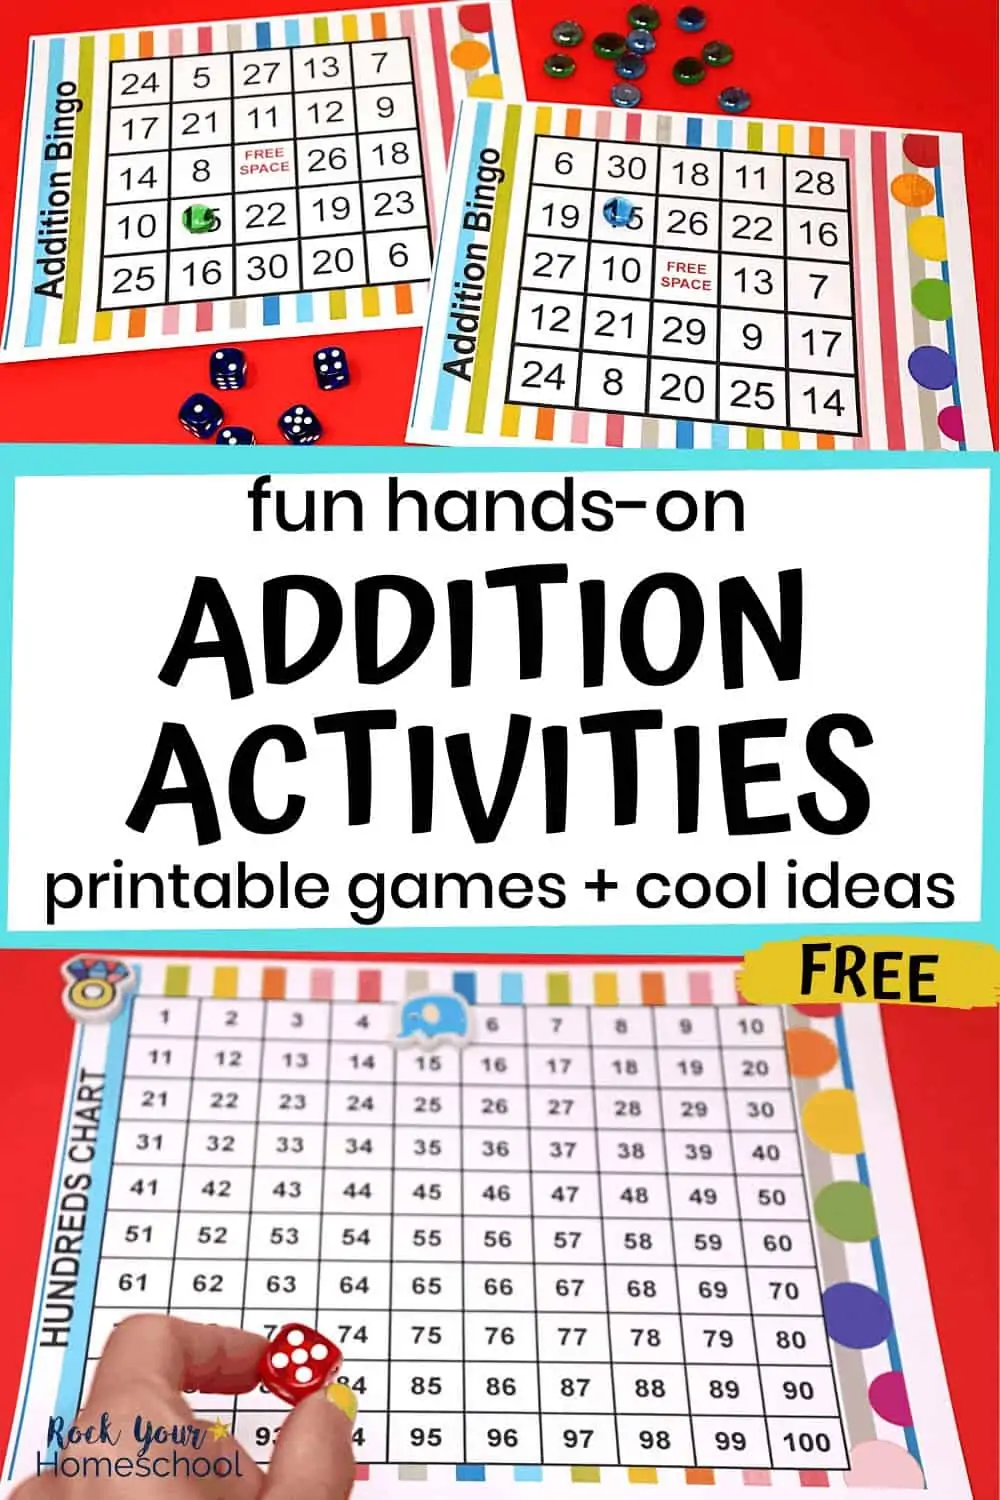 Awesome Hands-On Addition Activities to Make Math Fun